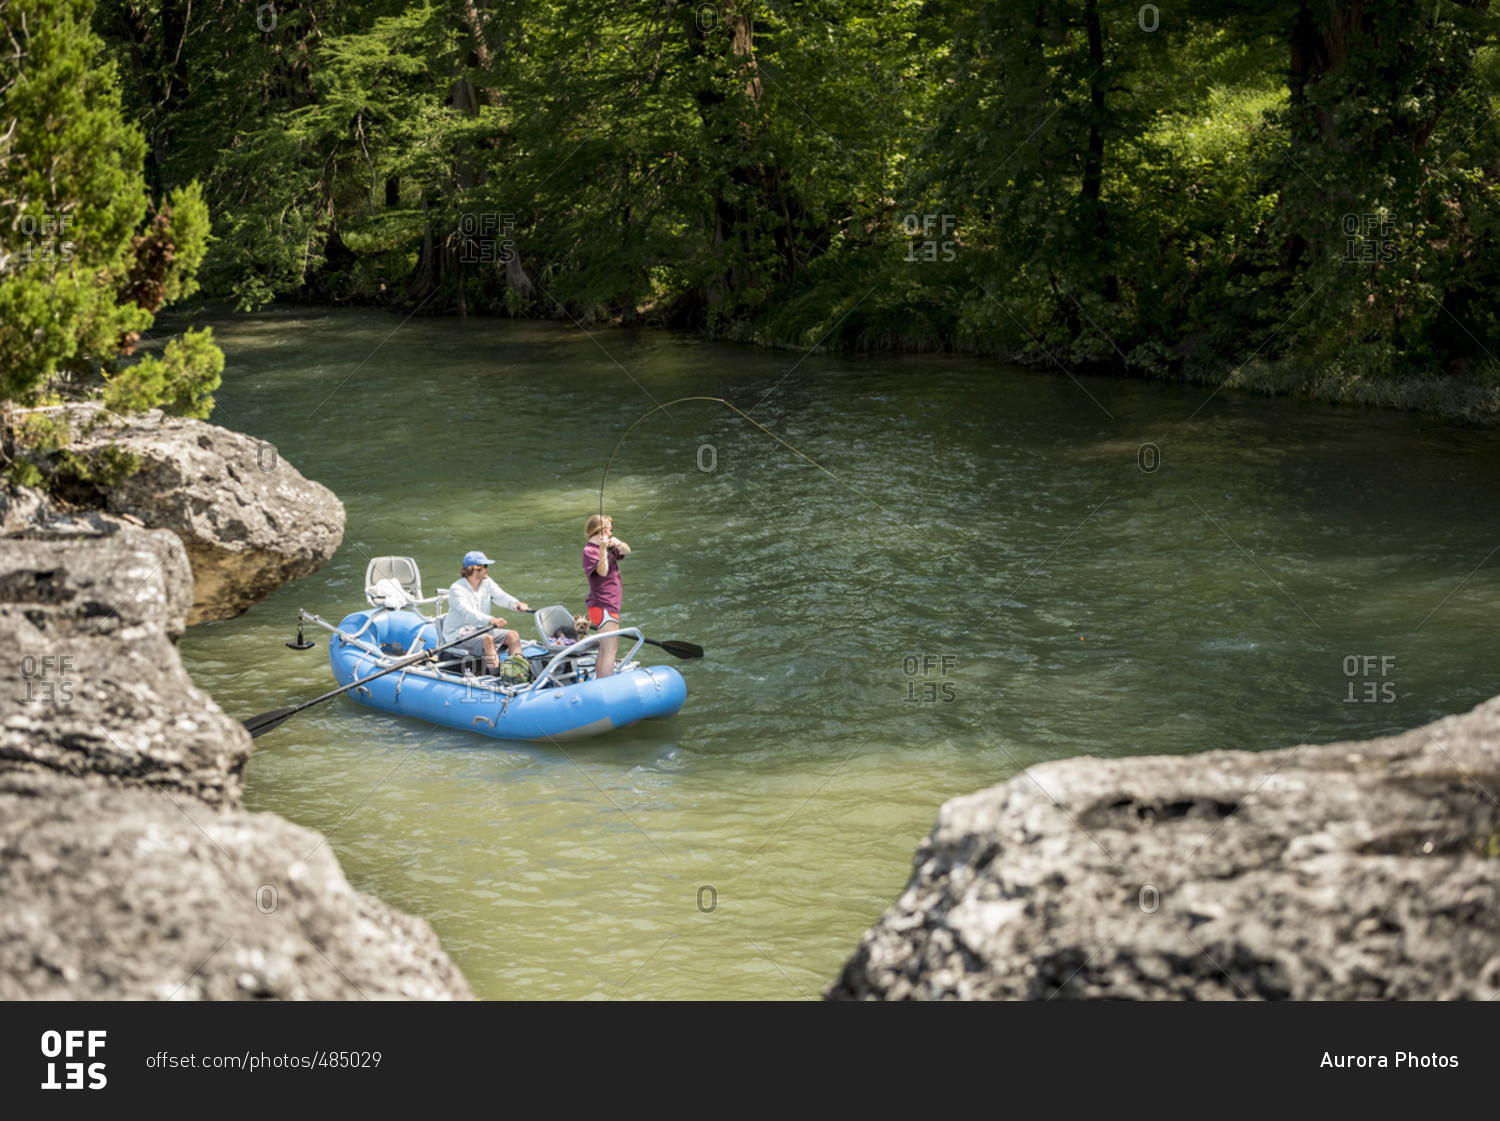 A Woman Fly Fishing For Rainbow Trout While Man Riding Dinghy On Guadalupe River